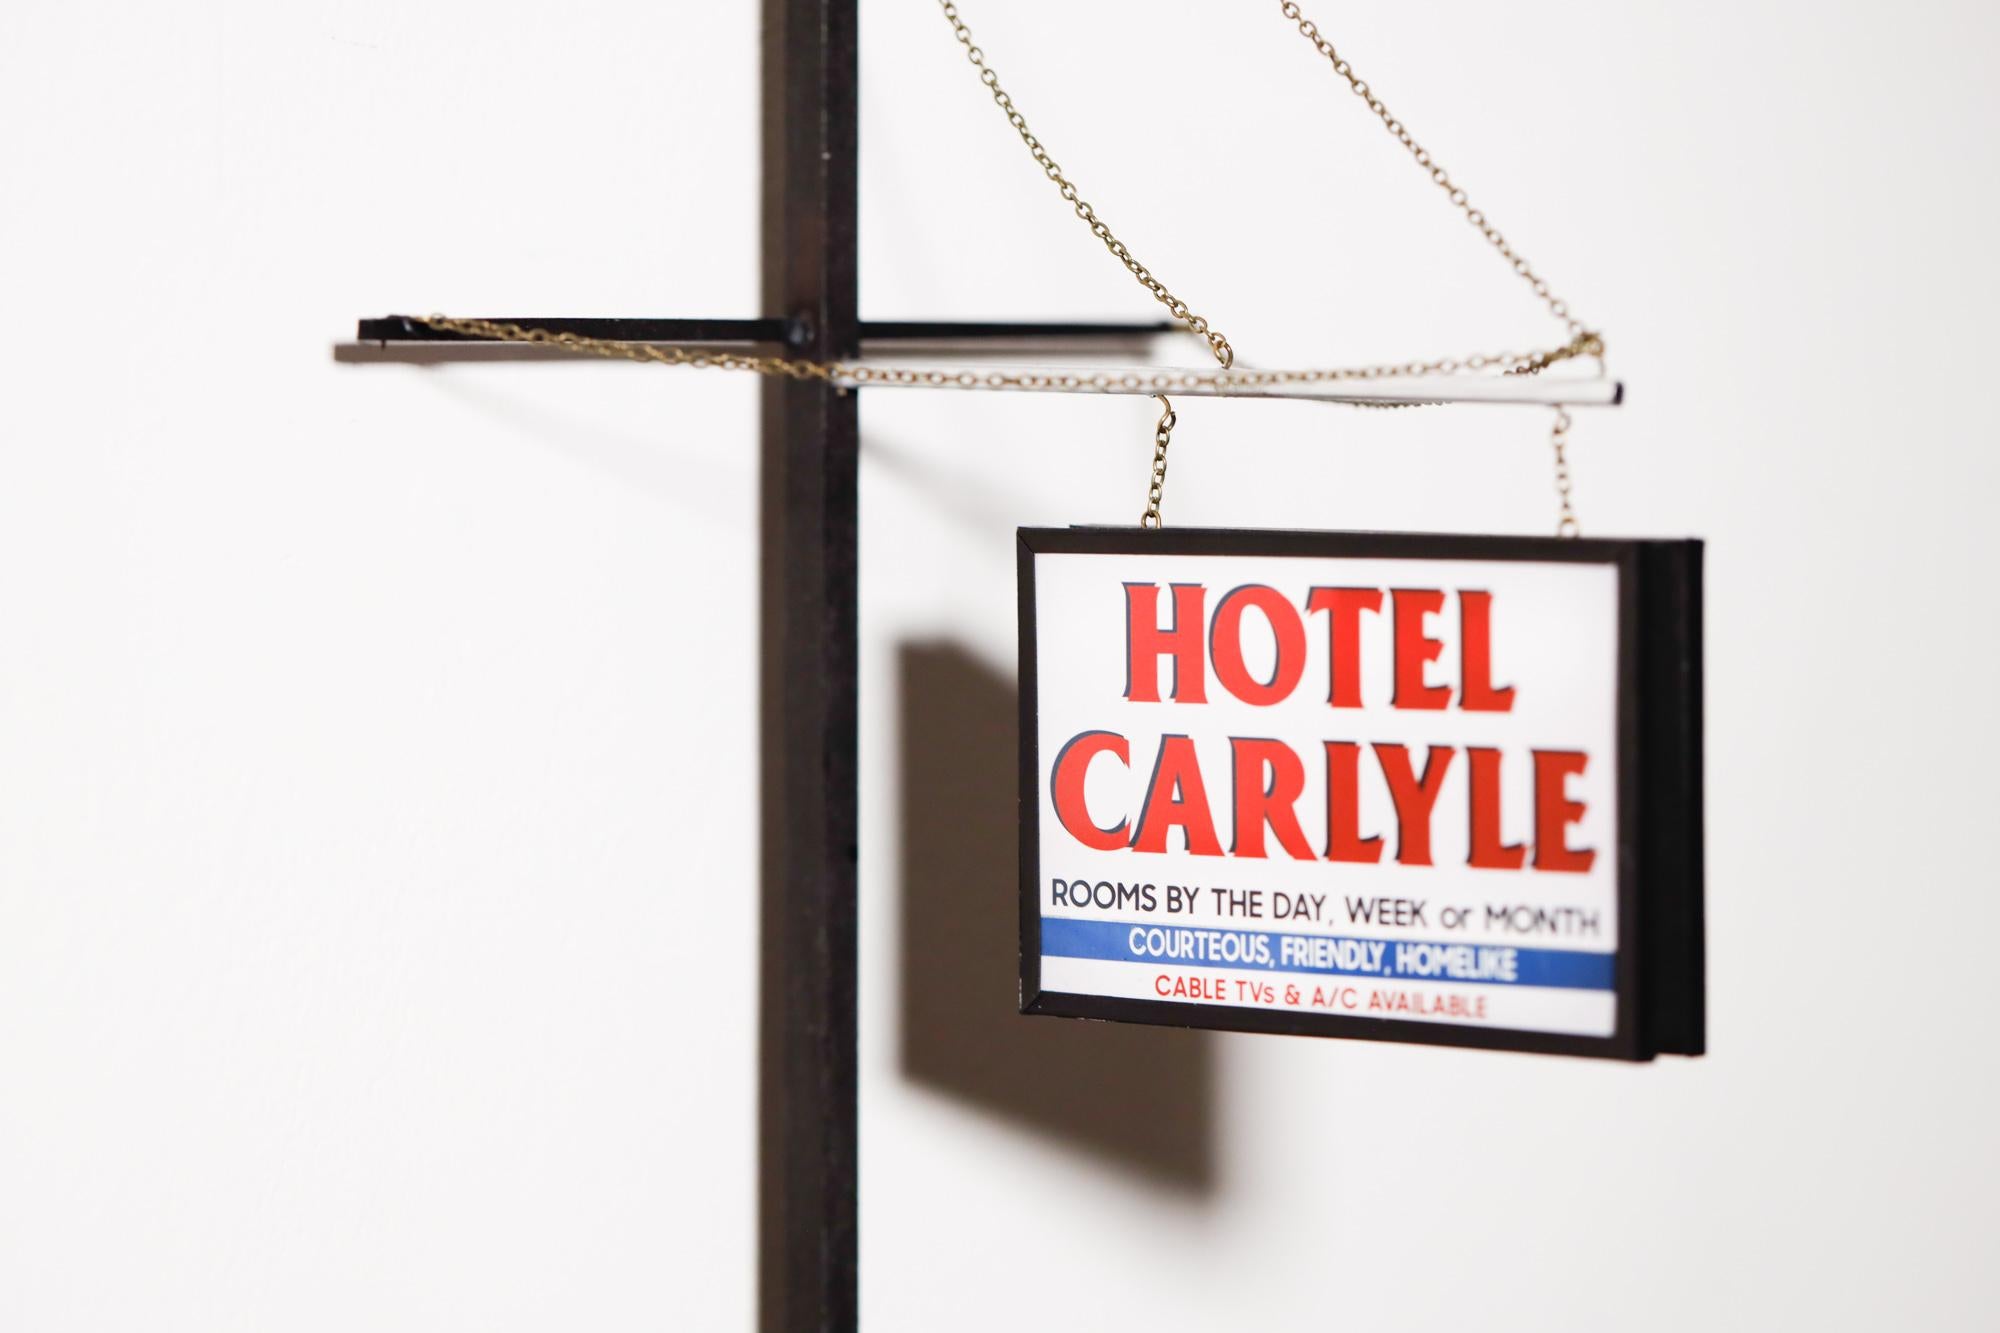 Hotel Carlyle - Contemporary Sculpture by Drew Leshko